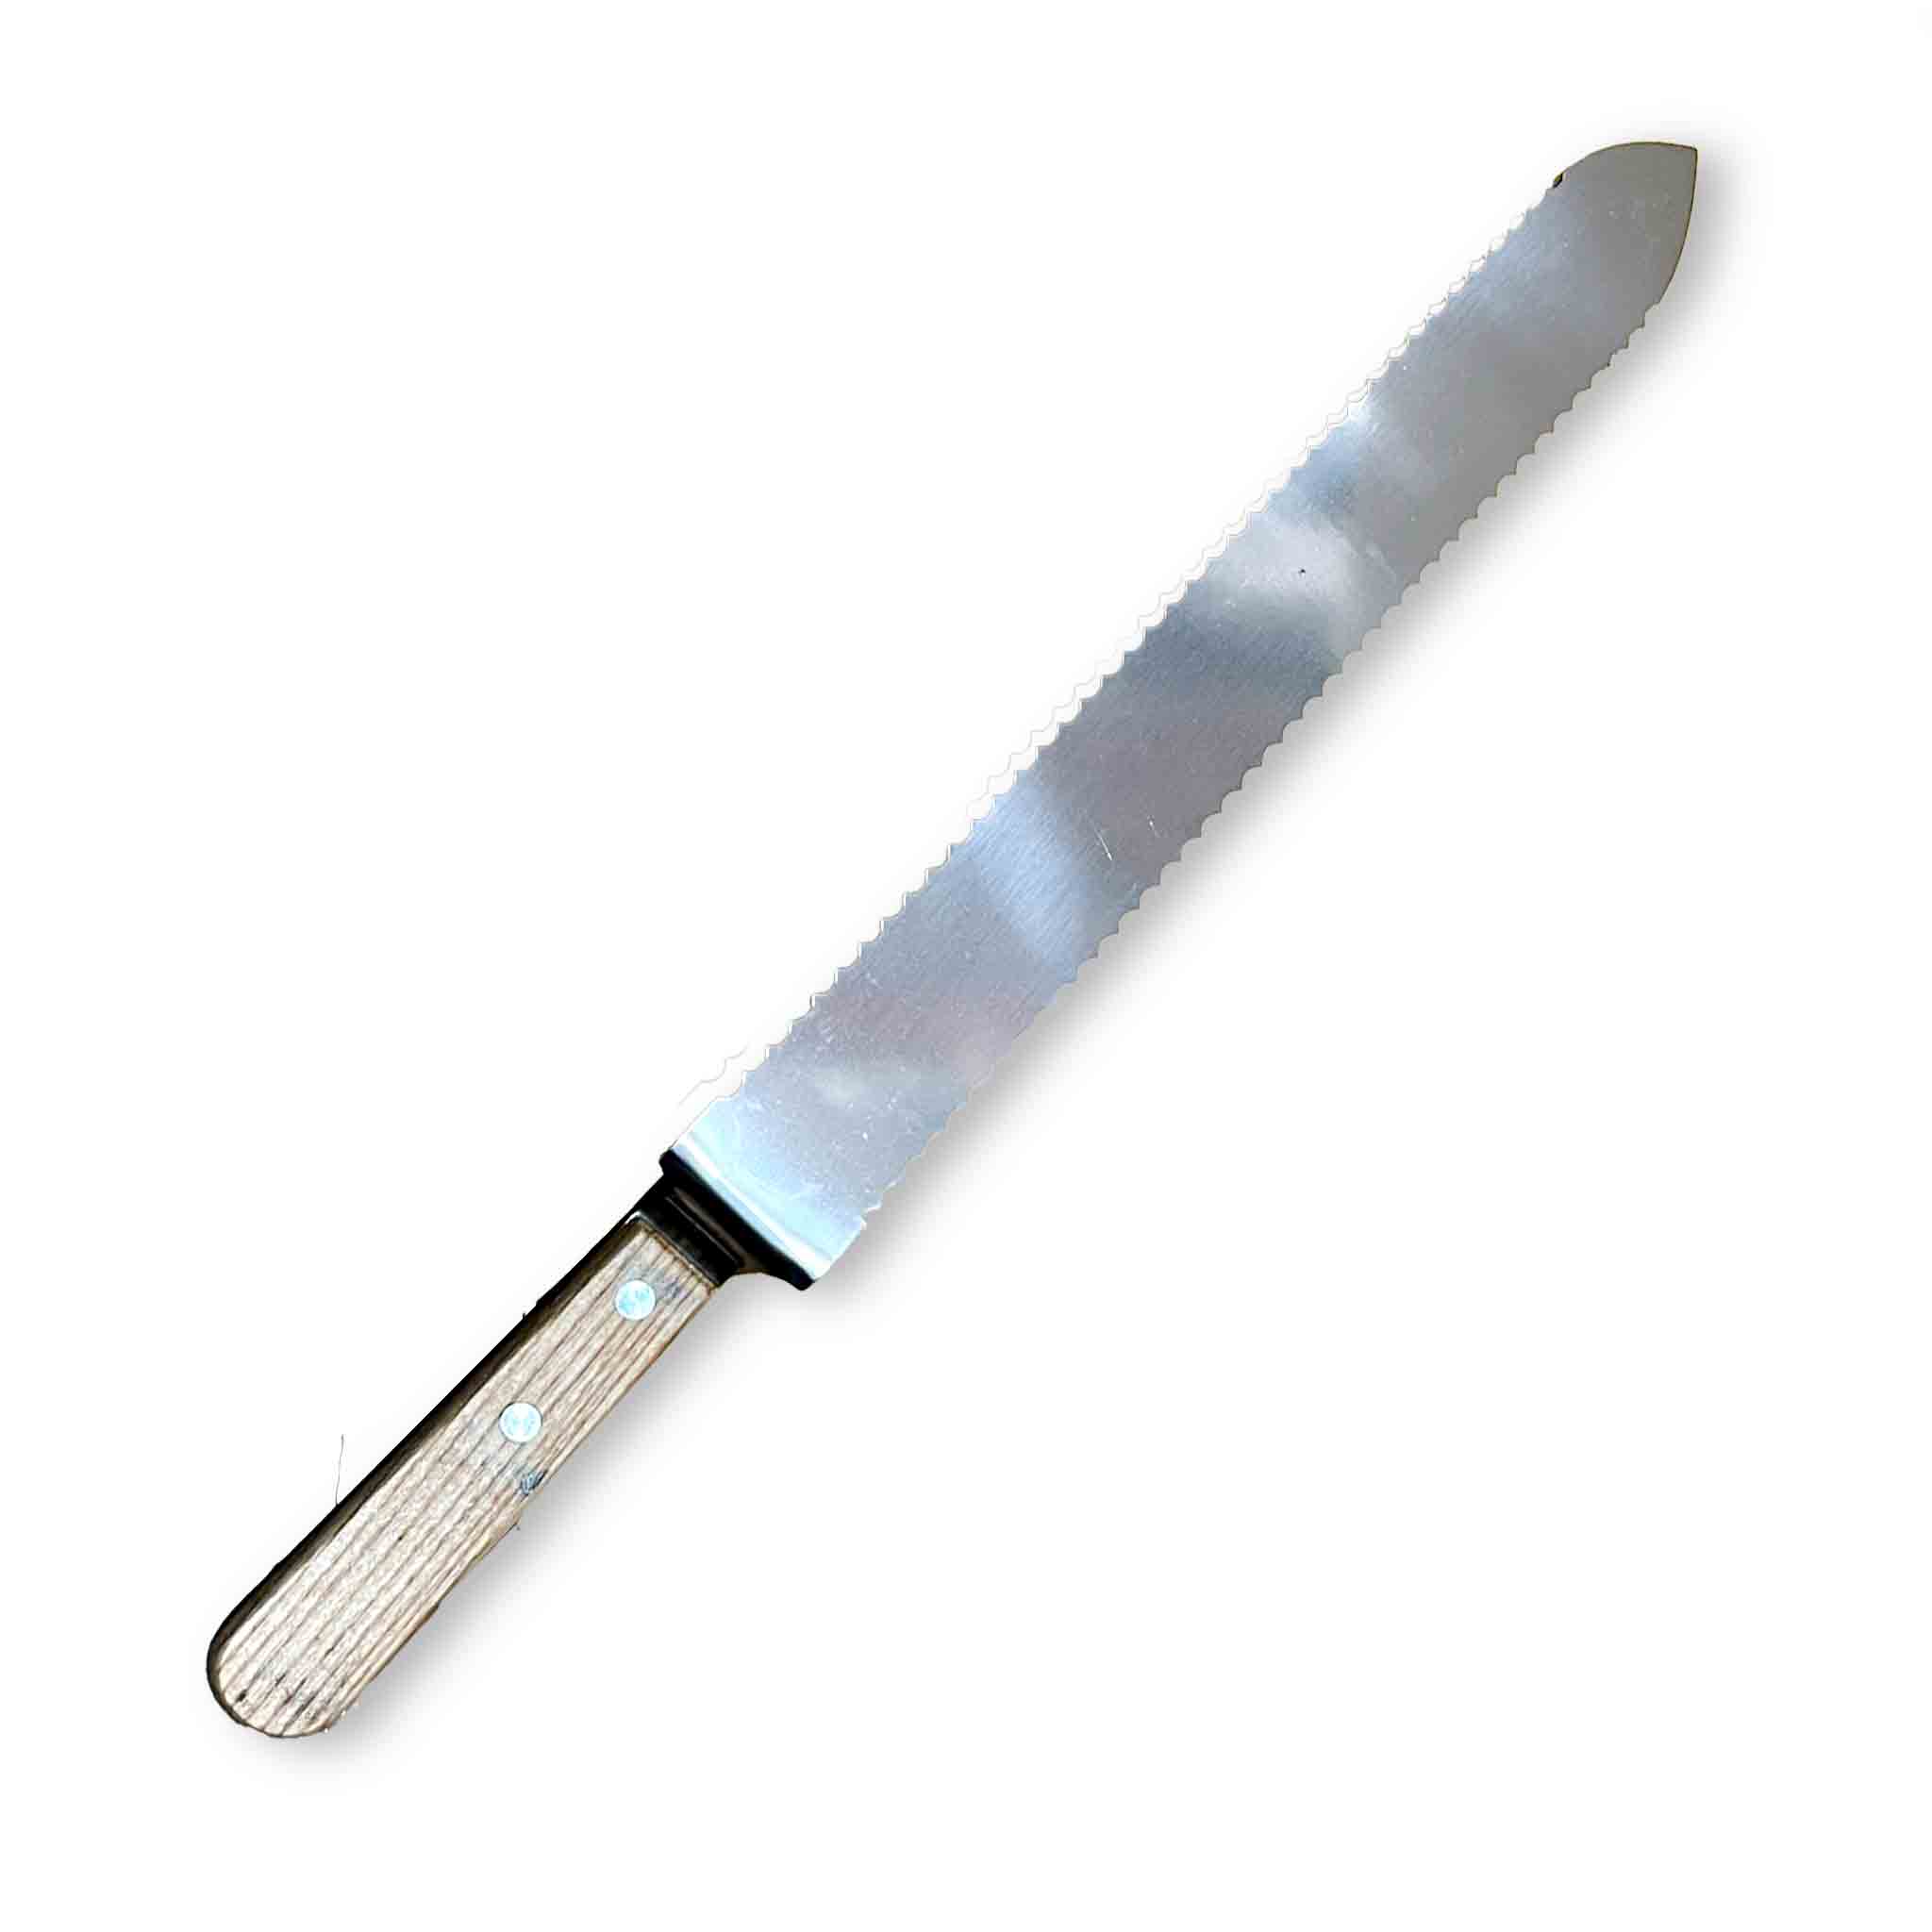 Cold Uncapping Knife Serrated- Stainless Steel - Large - Uncapping Tools collection by Buzzbee Beekeeping Supplies